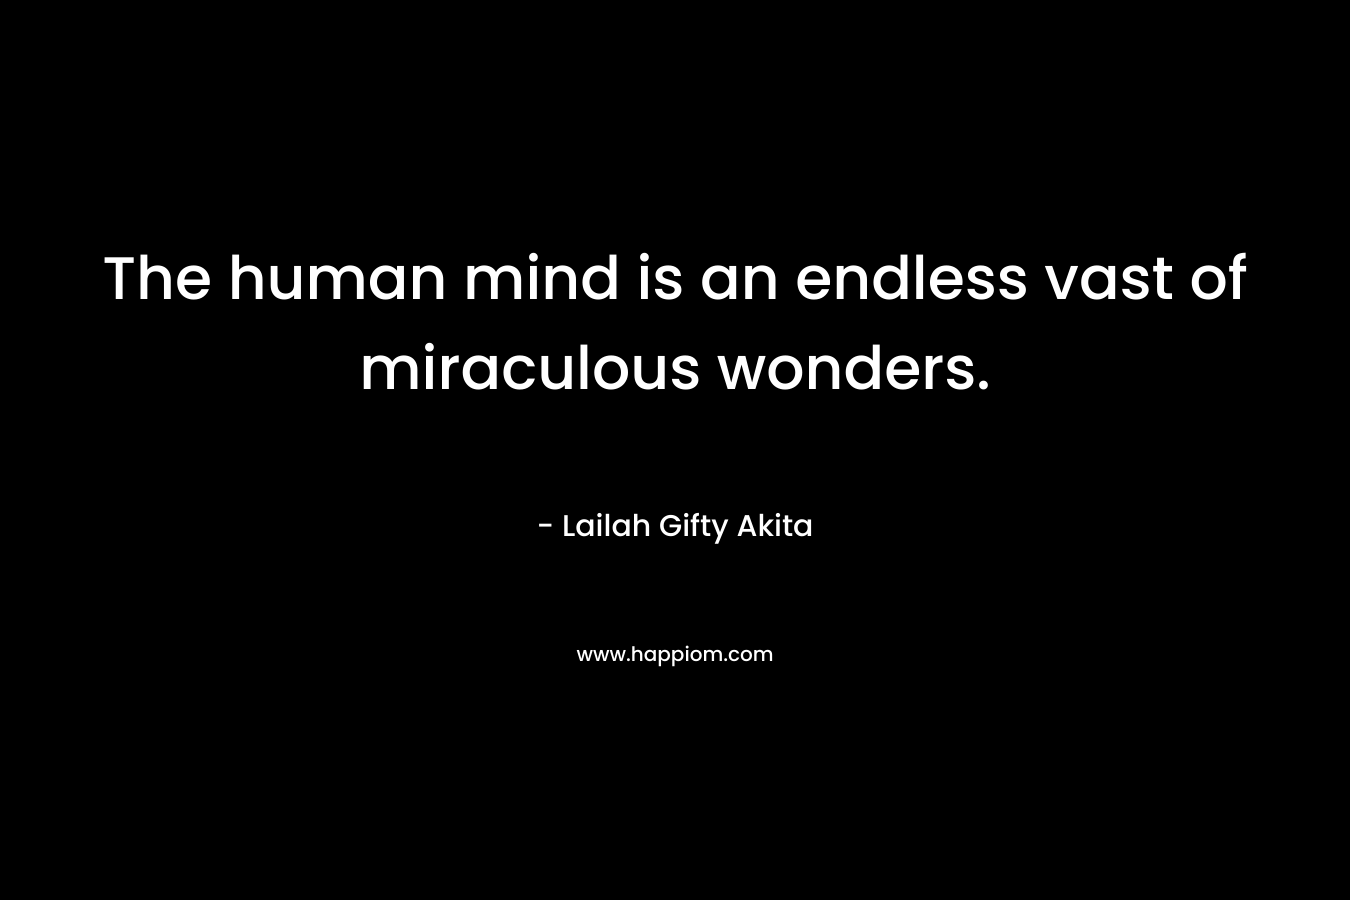 The human mind is an endless vast of miraculous wonders.